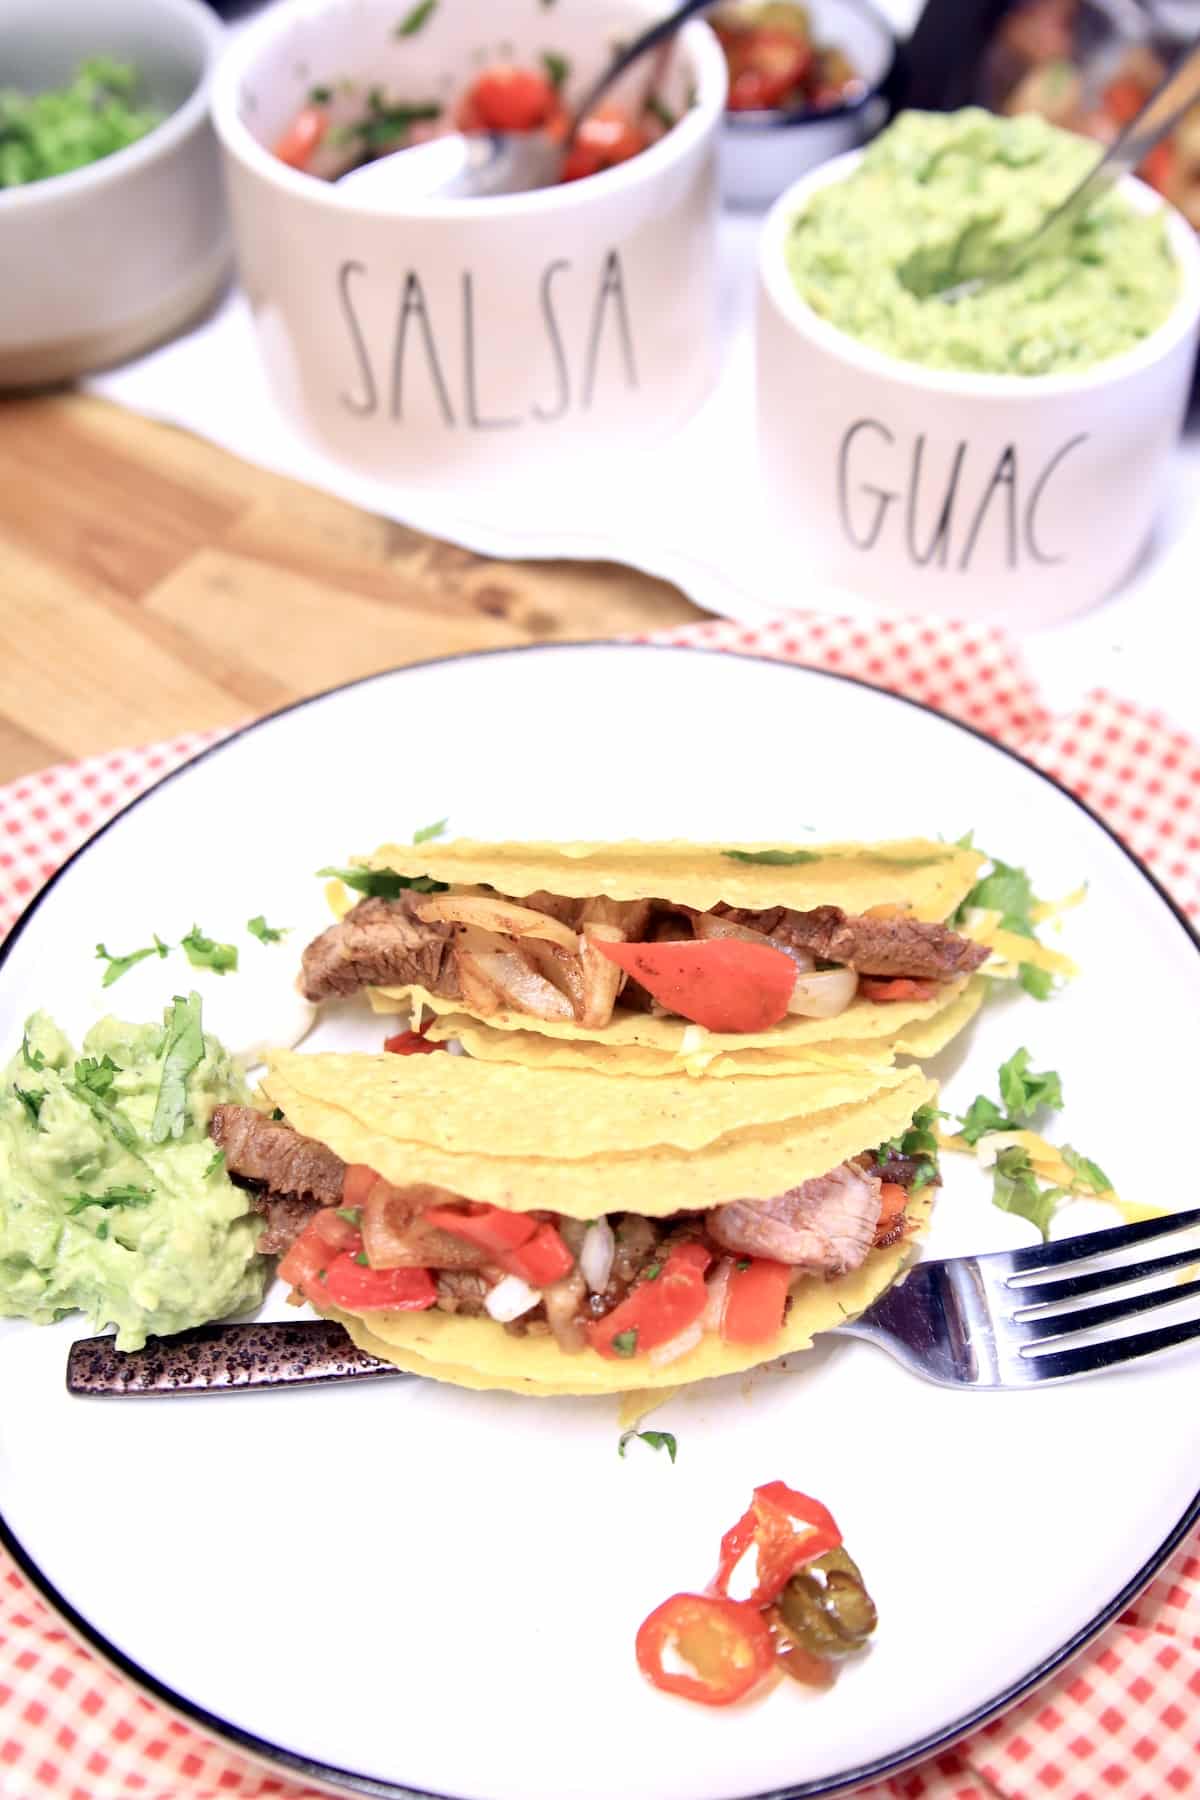 Plate of 2 steak tacos with guacamole.